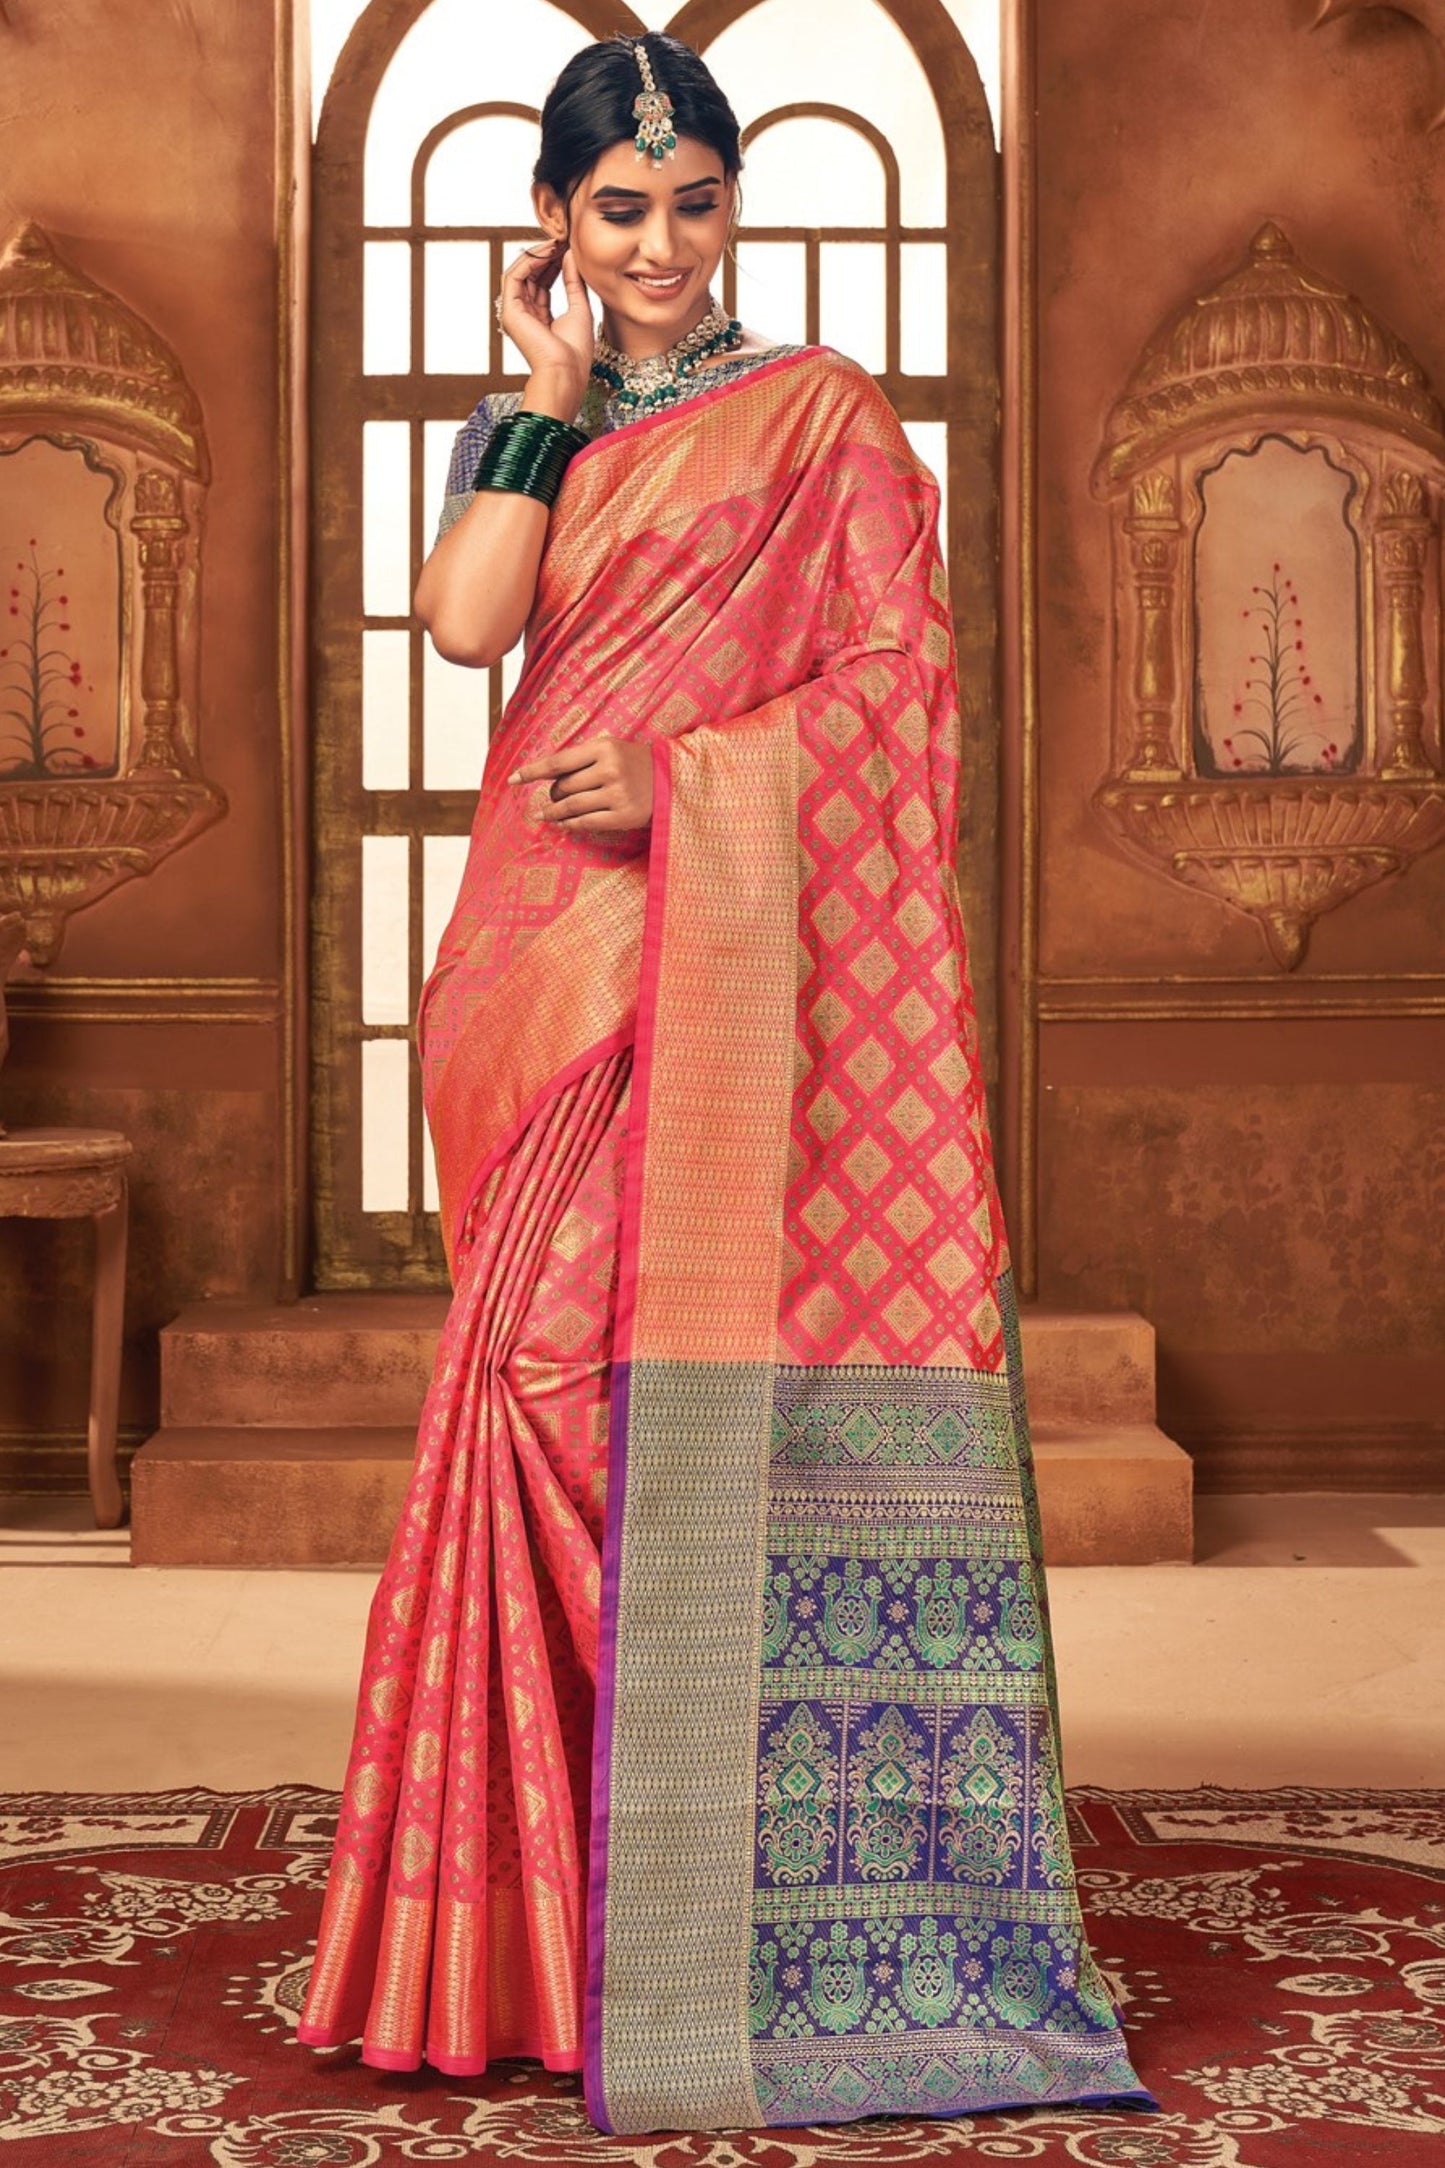 Dark Pink Patola Silk Sarees with Blouse for Weddings | Indian Sari for Festival - Woven